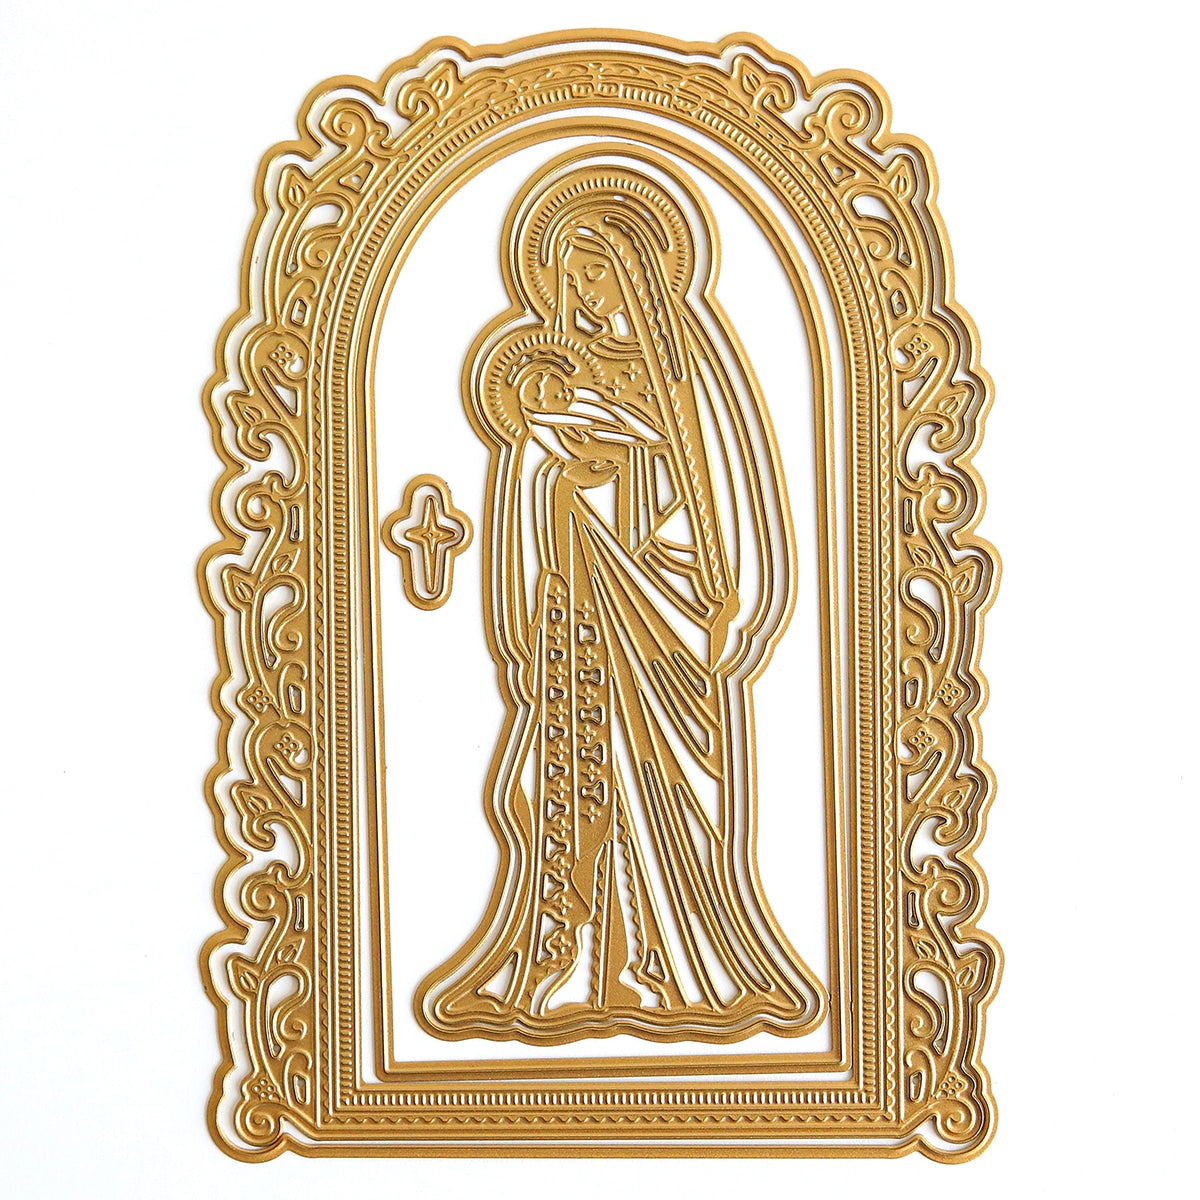 An ornate Madonna & Child Die Set frame with an image of the virgin mary.